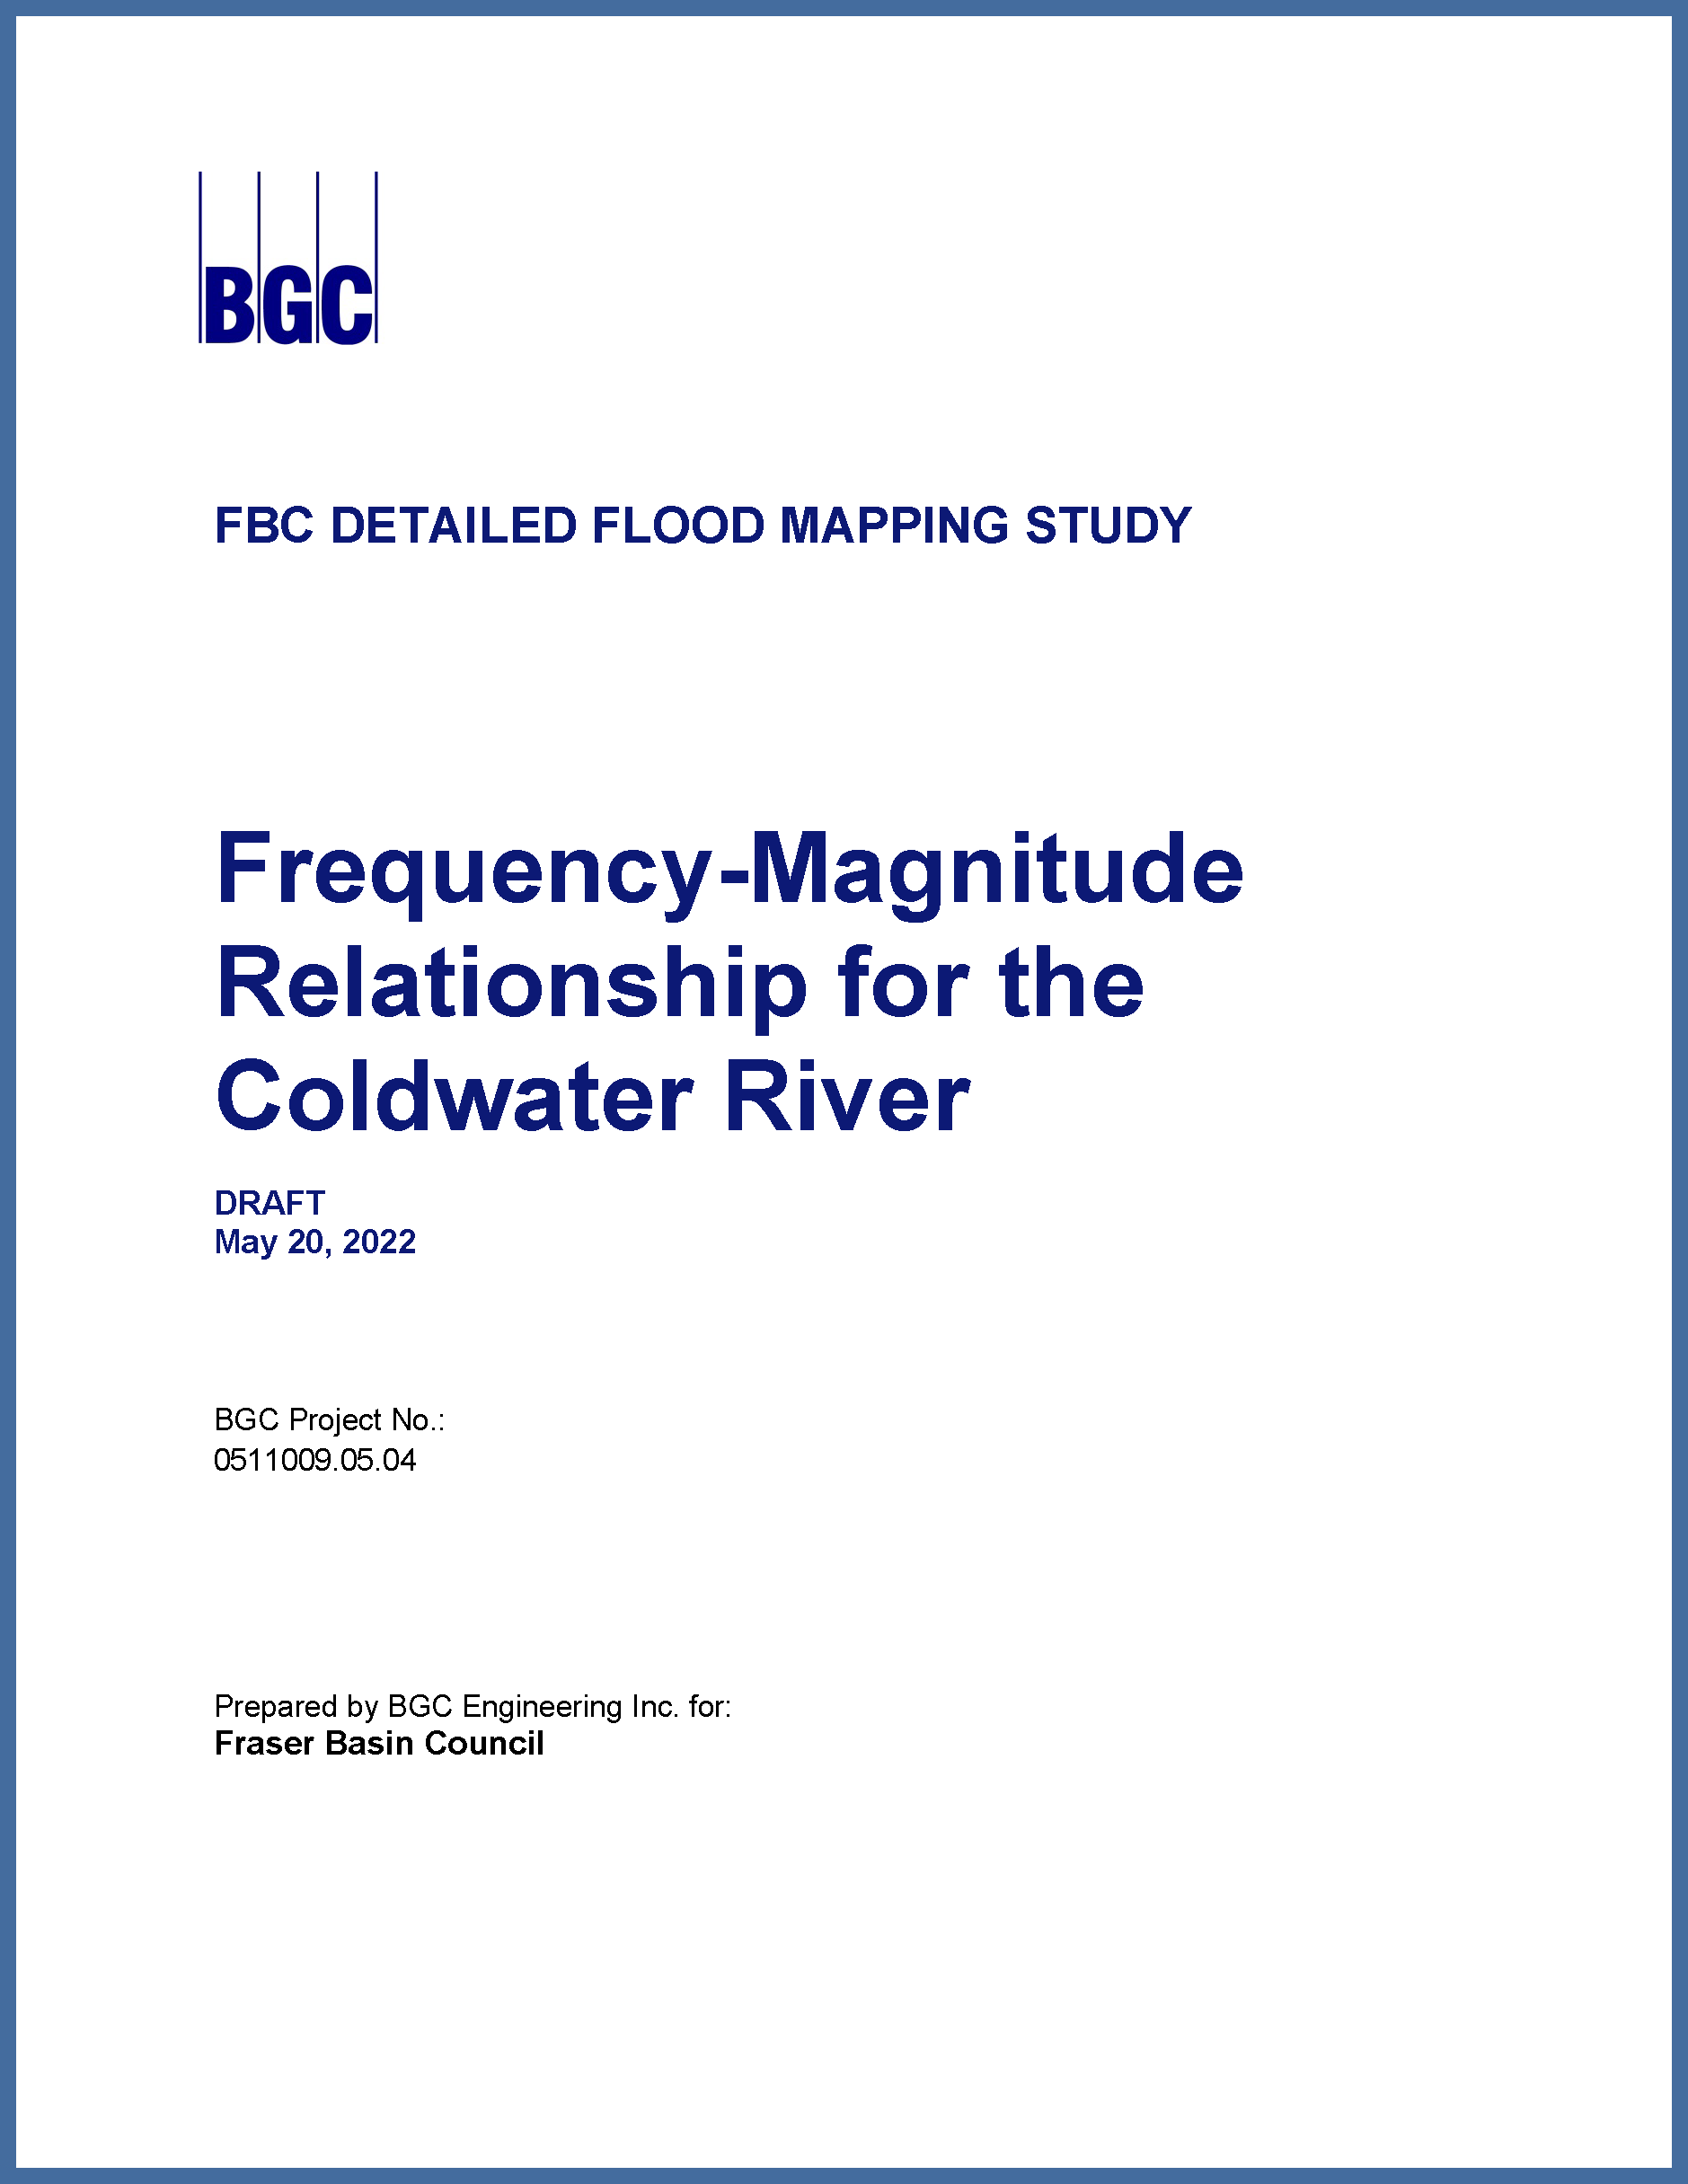 Frequency-Magnitude Relationship for the Coldwater River Draft Report (May 2022)